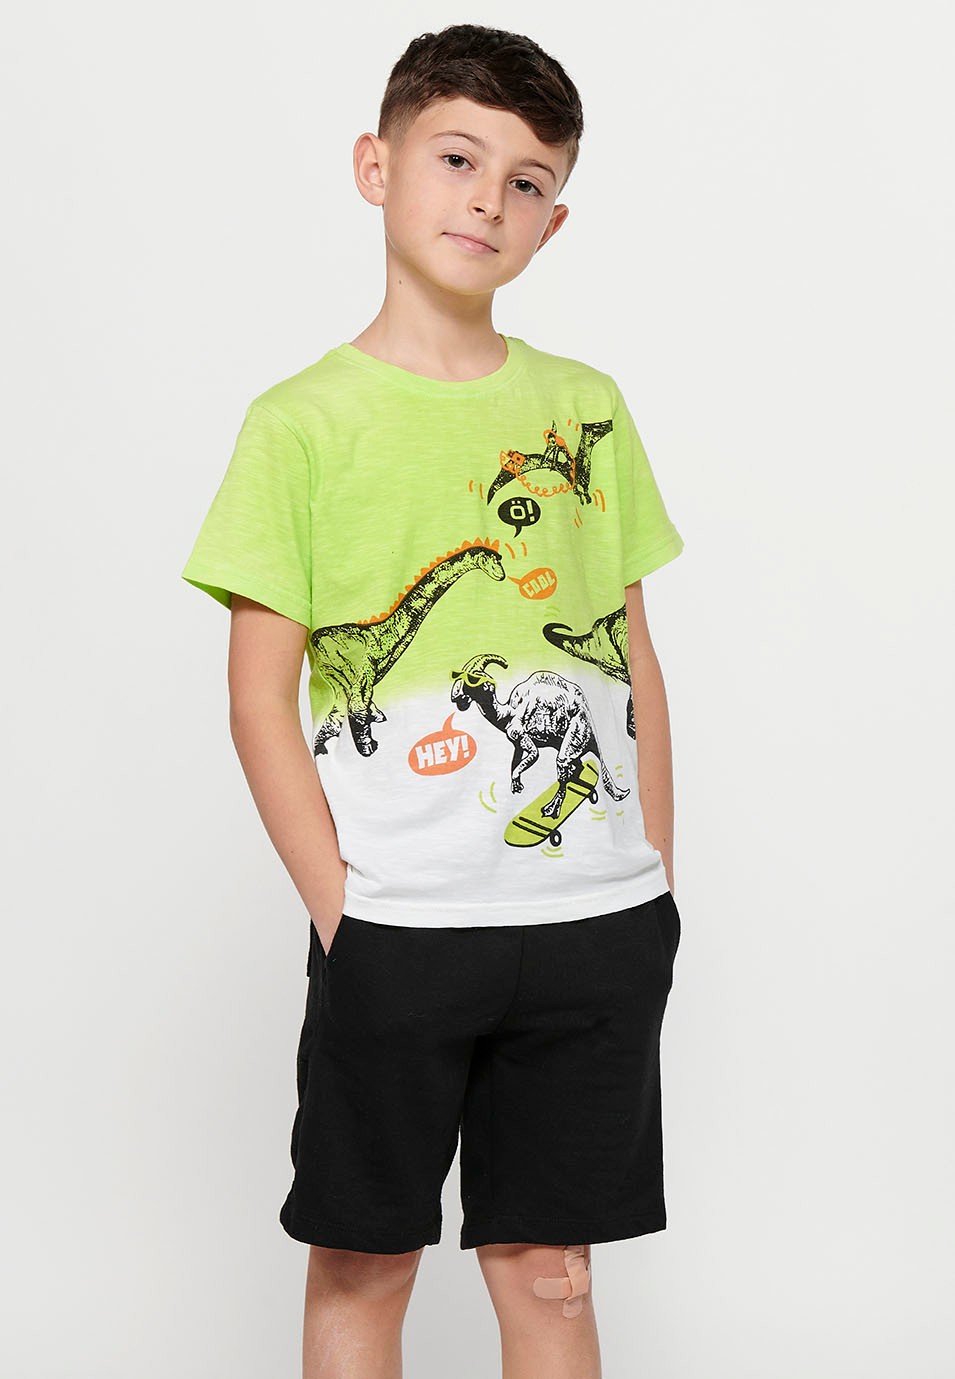 Short-sleeved Cotton T-shirt with round neck and front print in Lime color for Boys